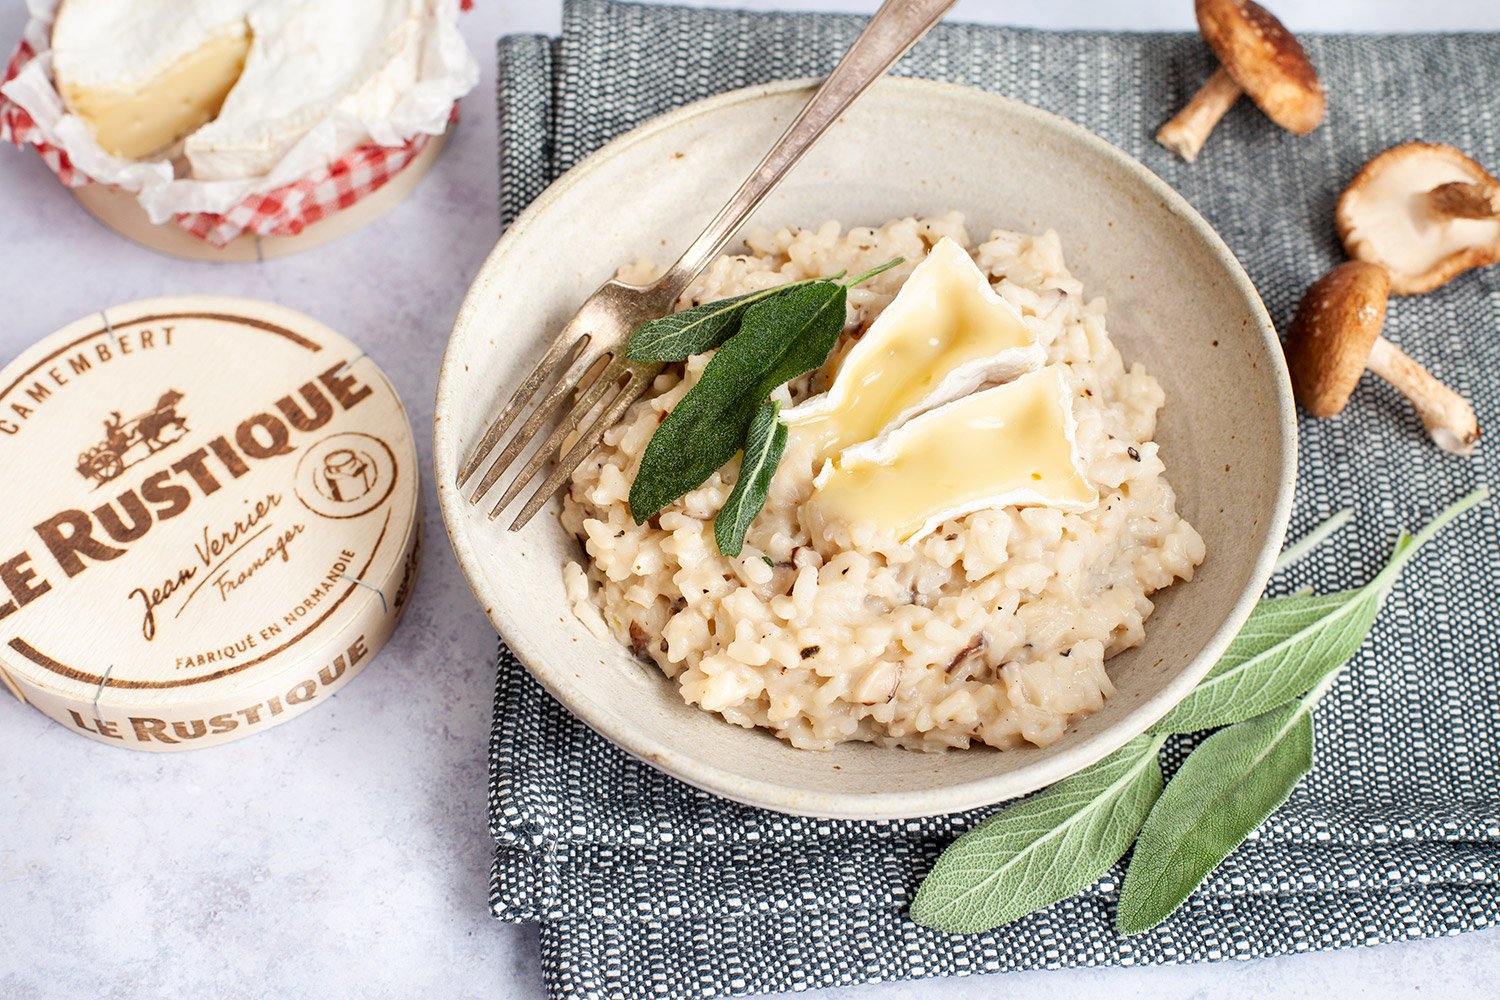 Recipe -  Risotto with mushrooms, Le Rustique camembert and crispy sage